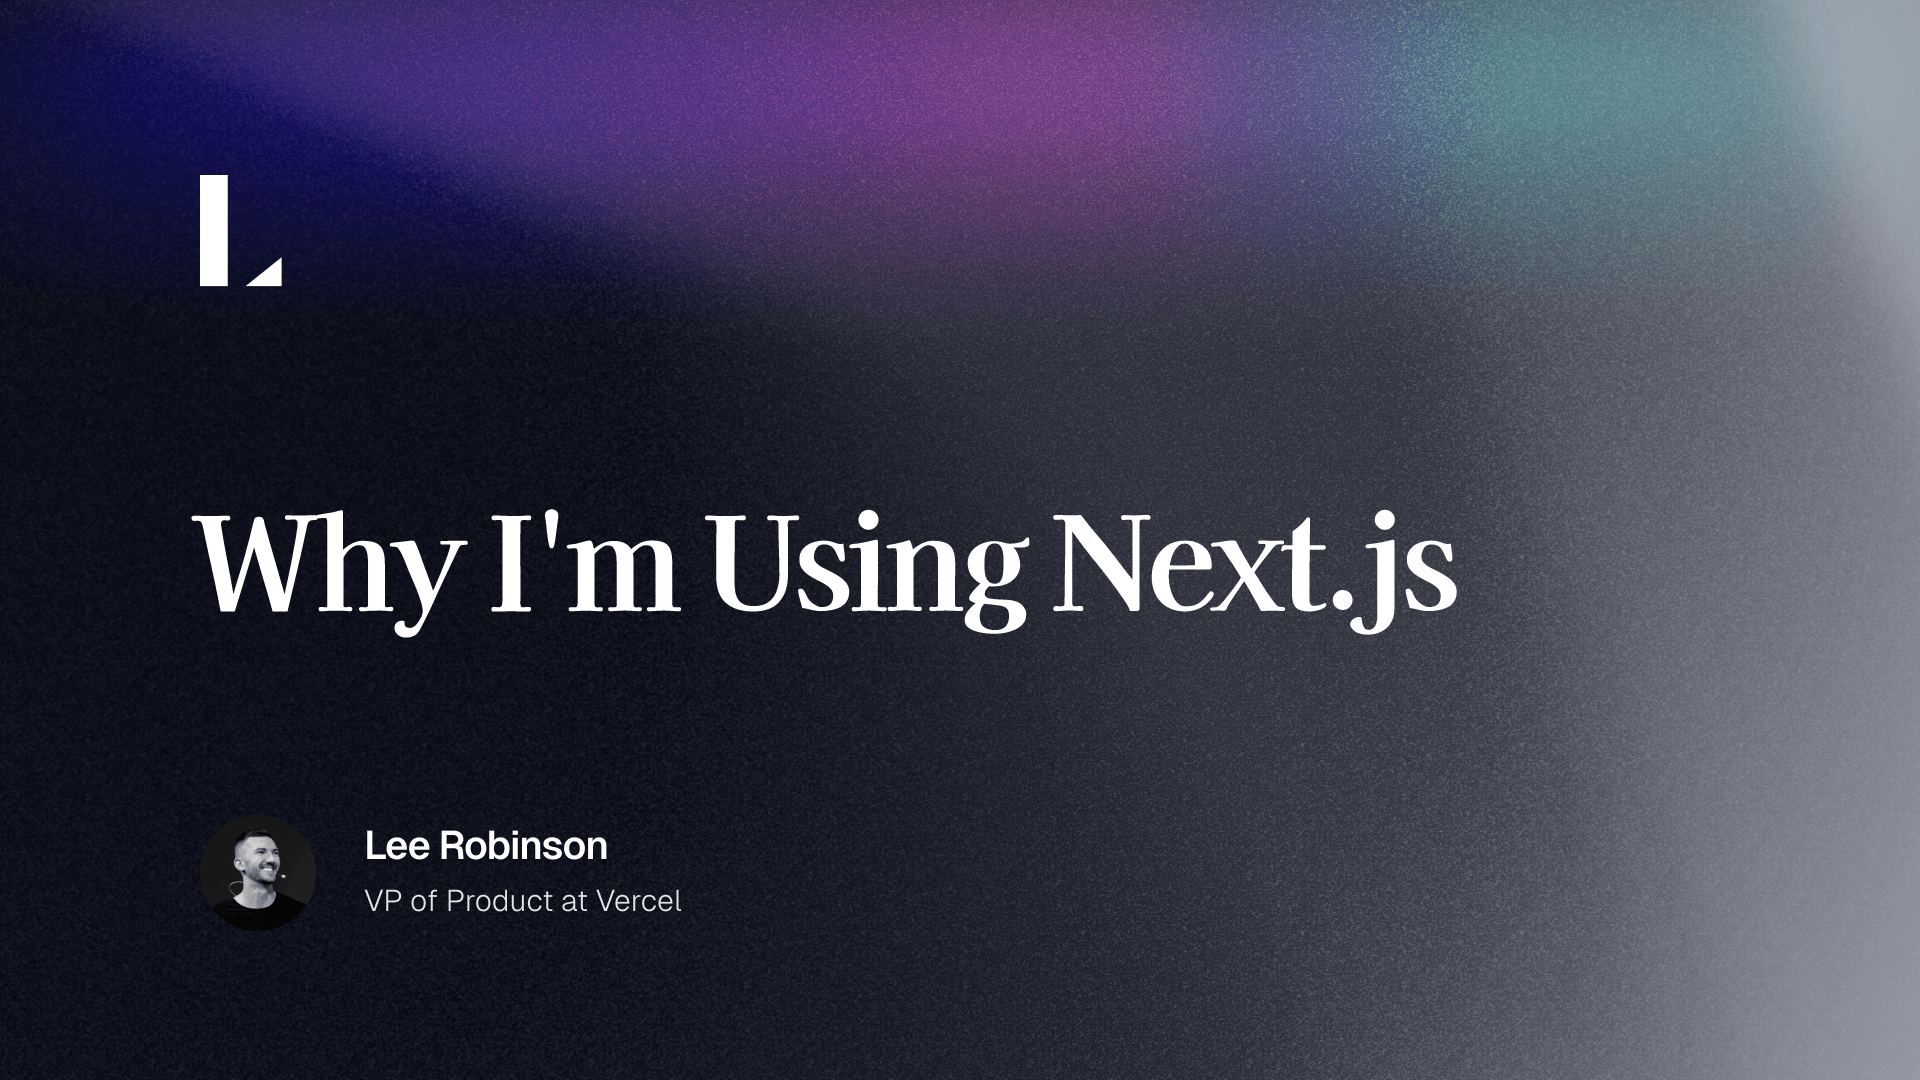 Why I'm Using Next.js